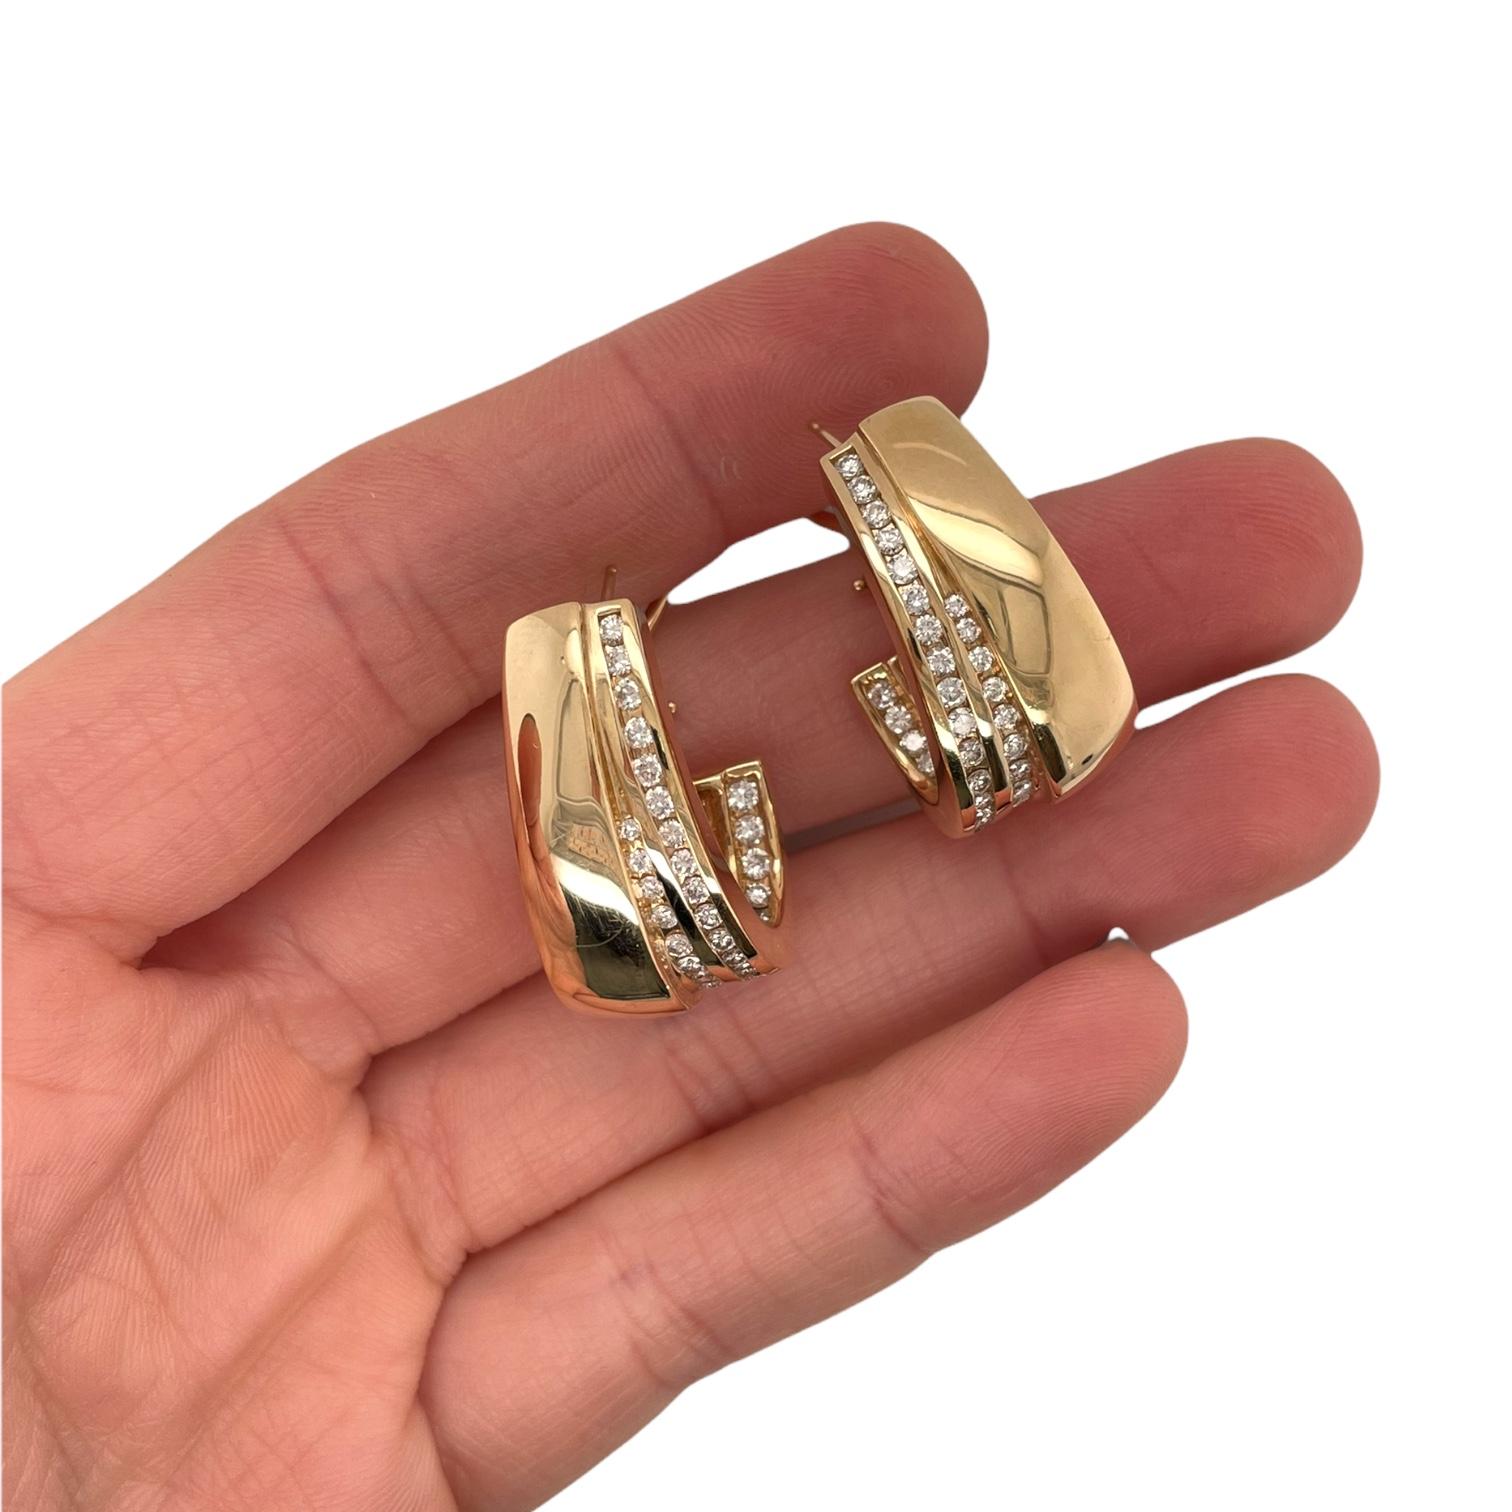 Earrings contain 64 round brilliant diamonds, 1.25cts. Diamonds are near colorless and VS2 in clarity, excellent cut. All stones are mounted in a handmade channel setting on the inside & outside of the hoop. Earrings contain a french clip post back.